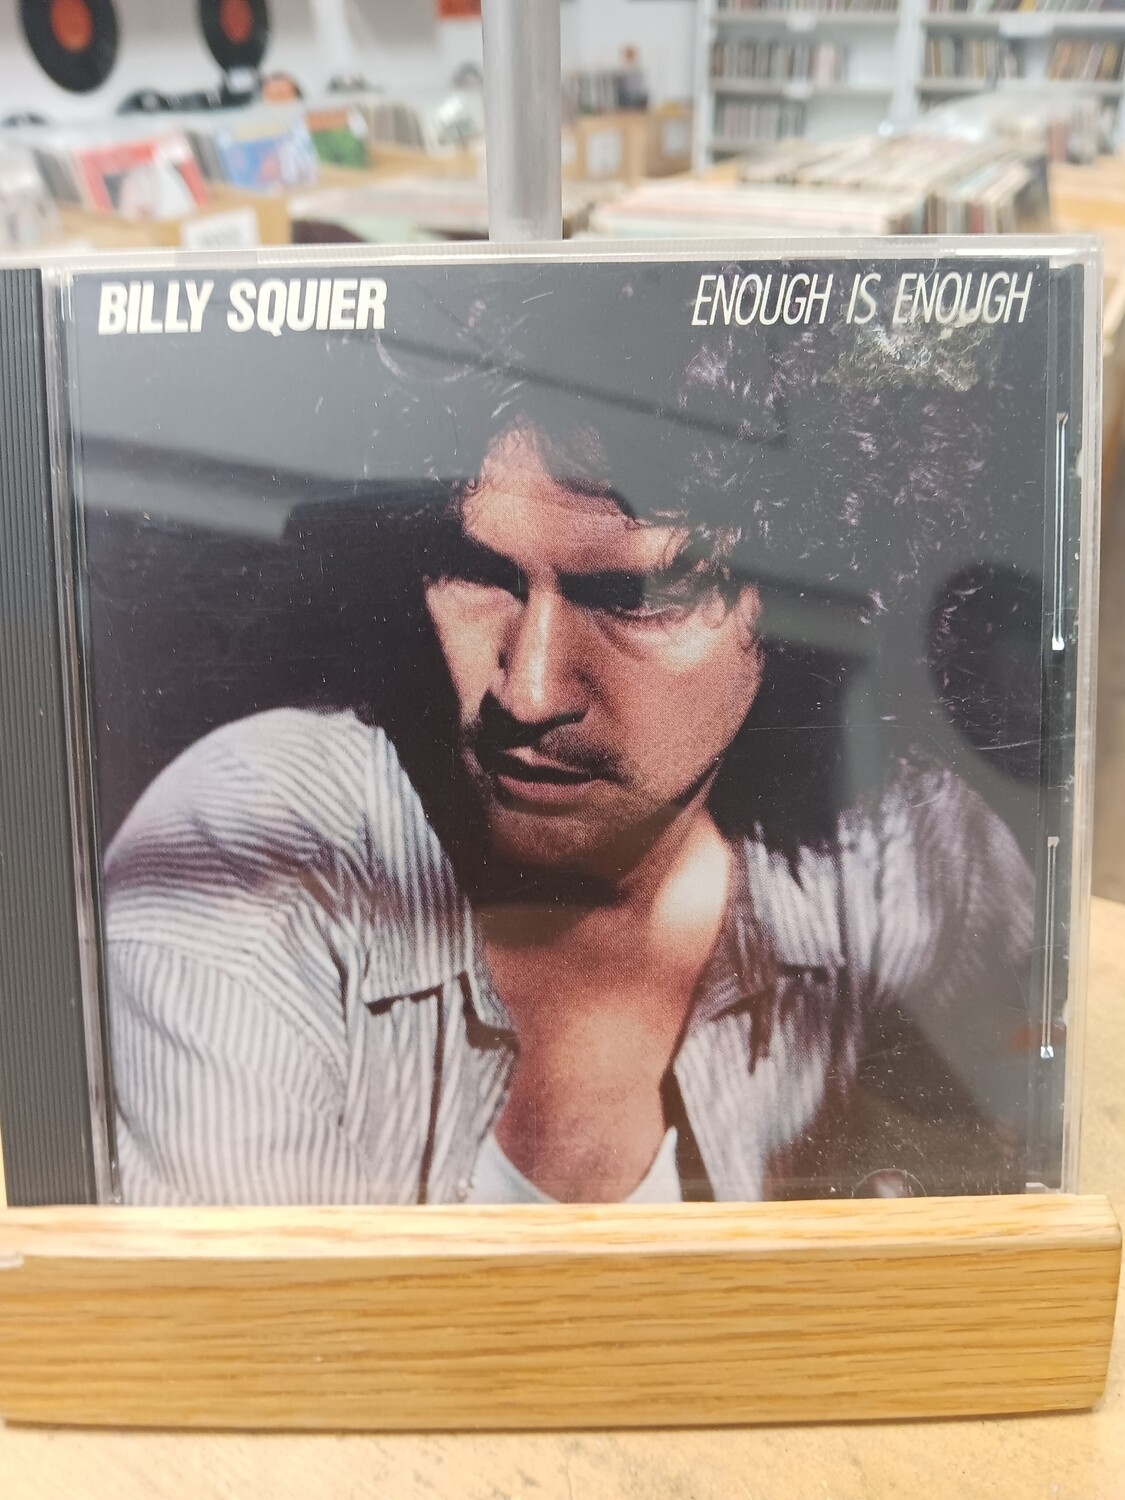 BILLY SQUIRE - Enough is enough (CD)